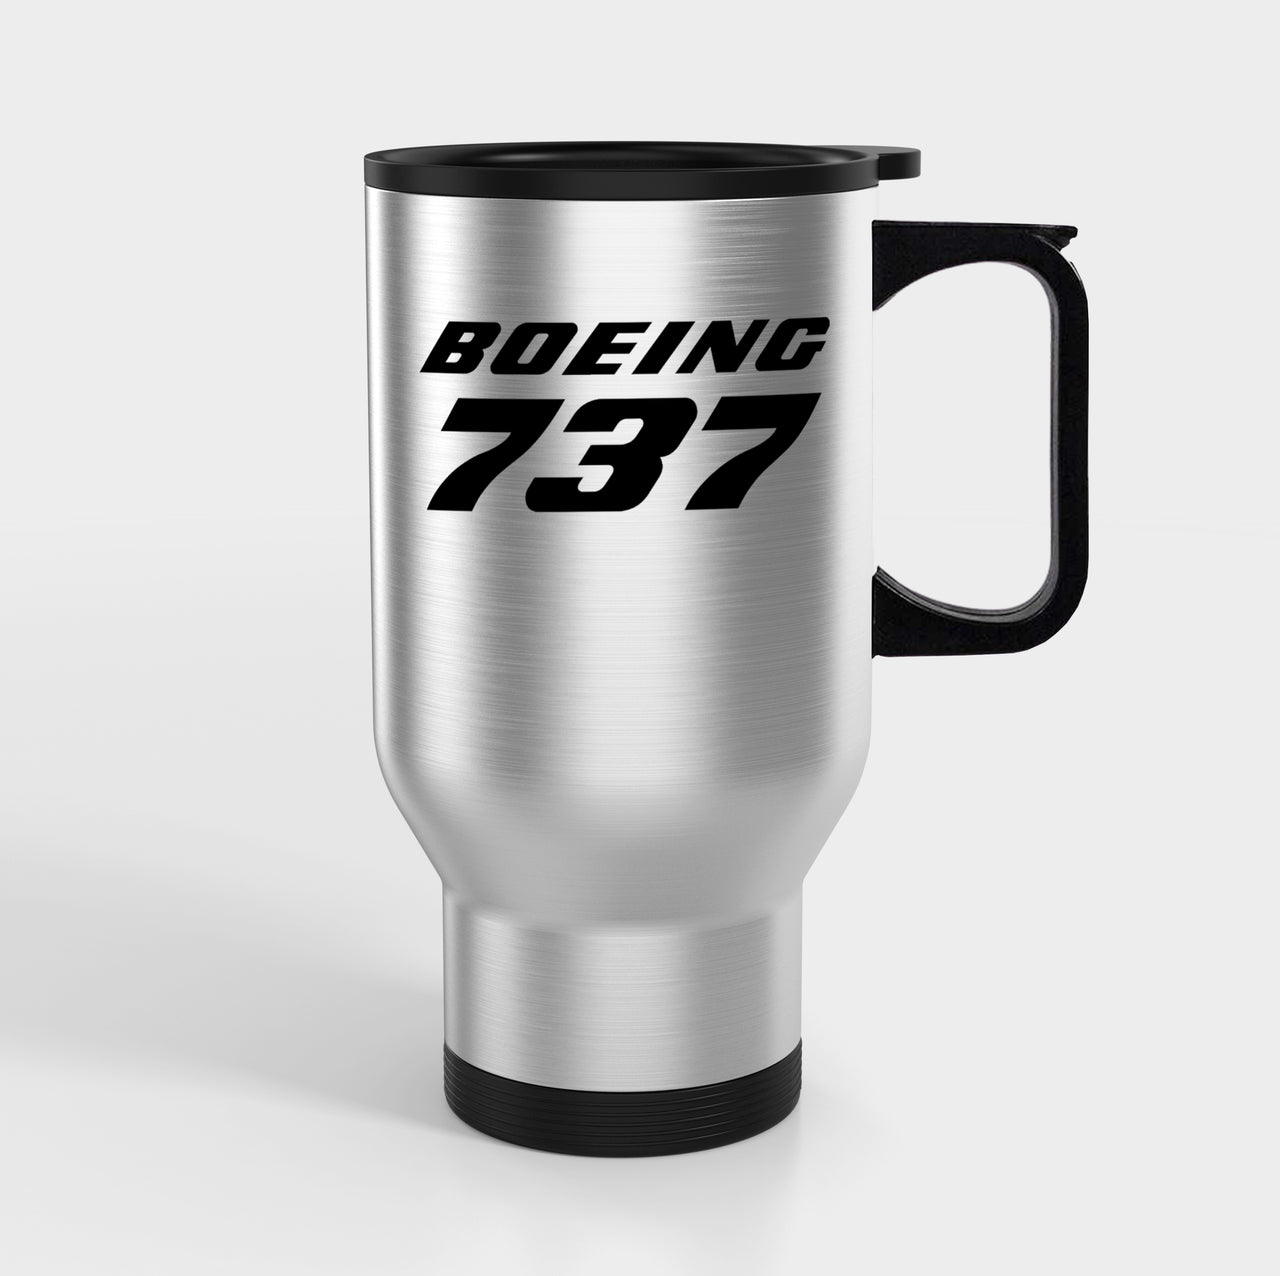 Boeing 737 & Text Designed Travel Mugs (With Holder)